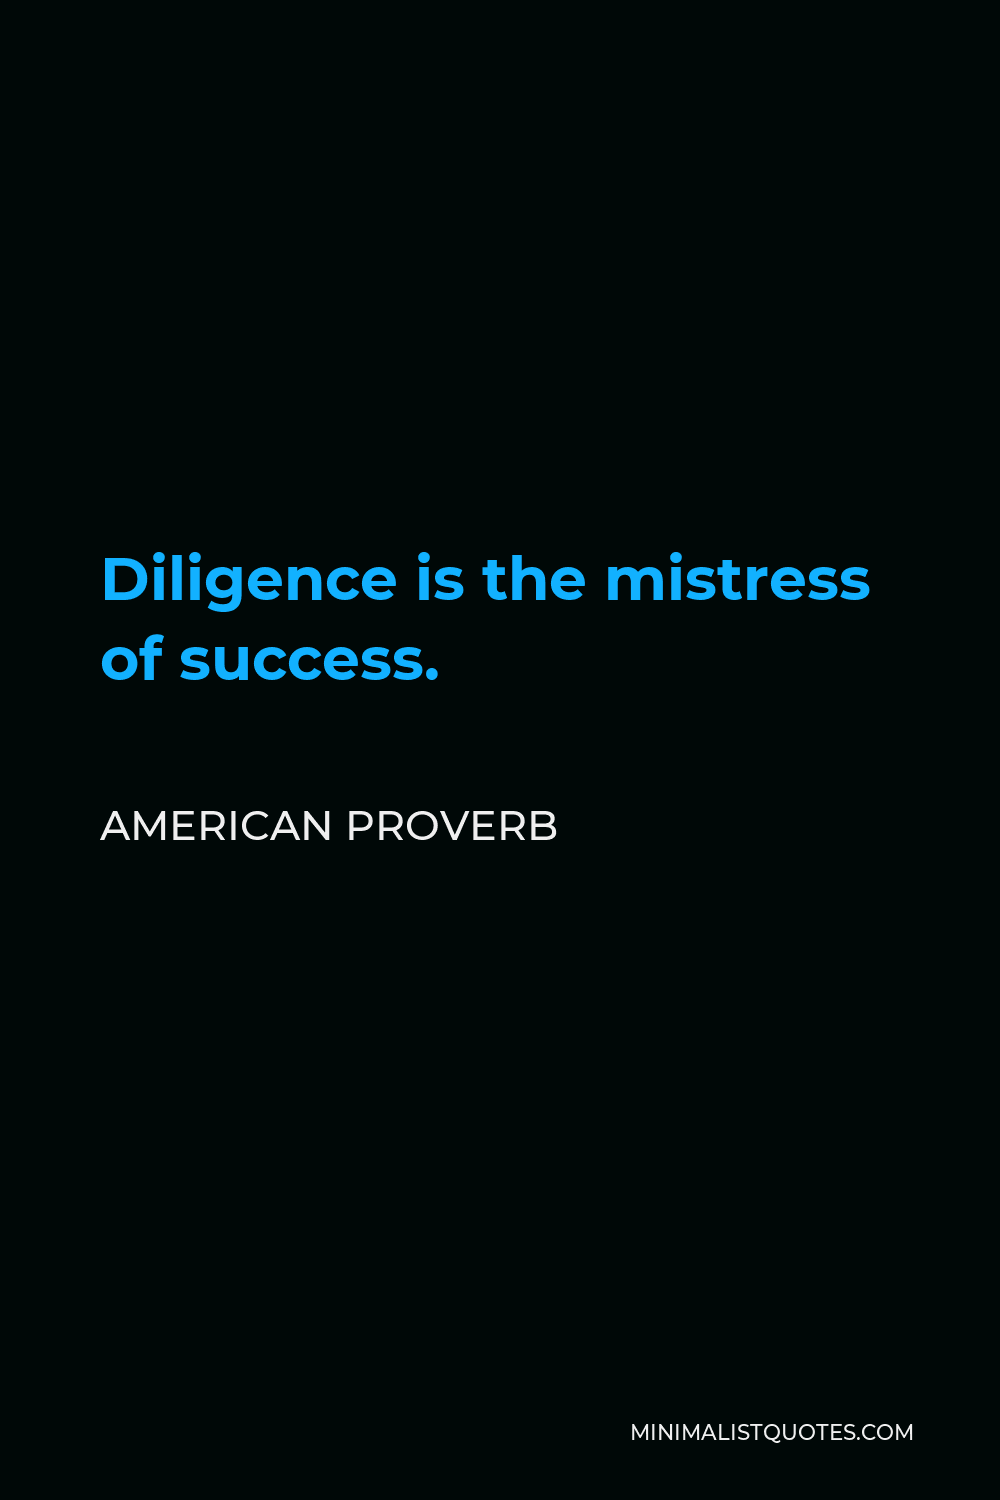 American Proverb Quote - Diligence is the mistress of success.